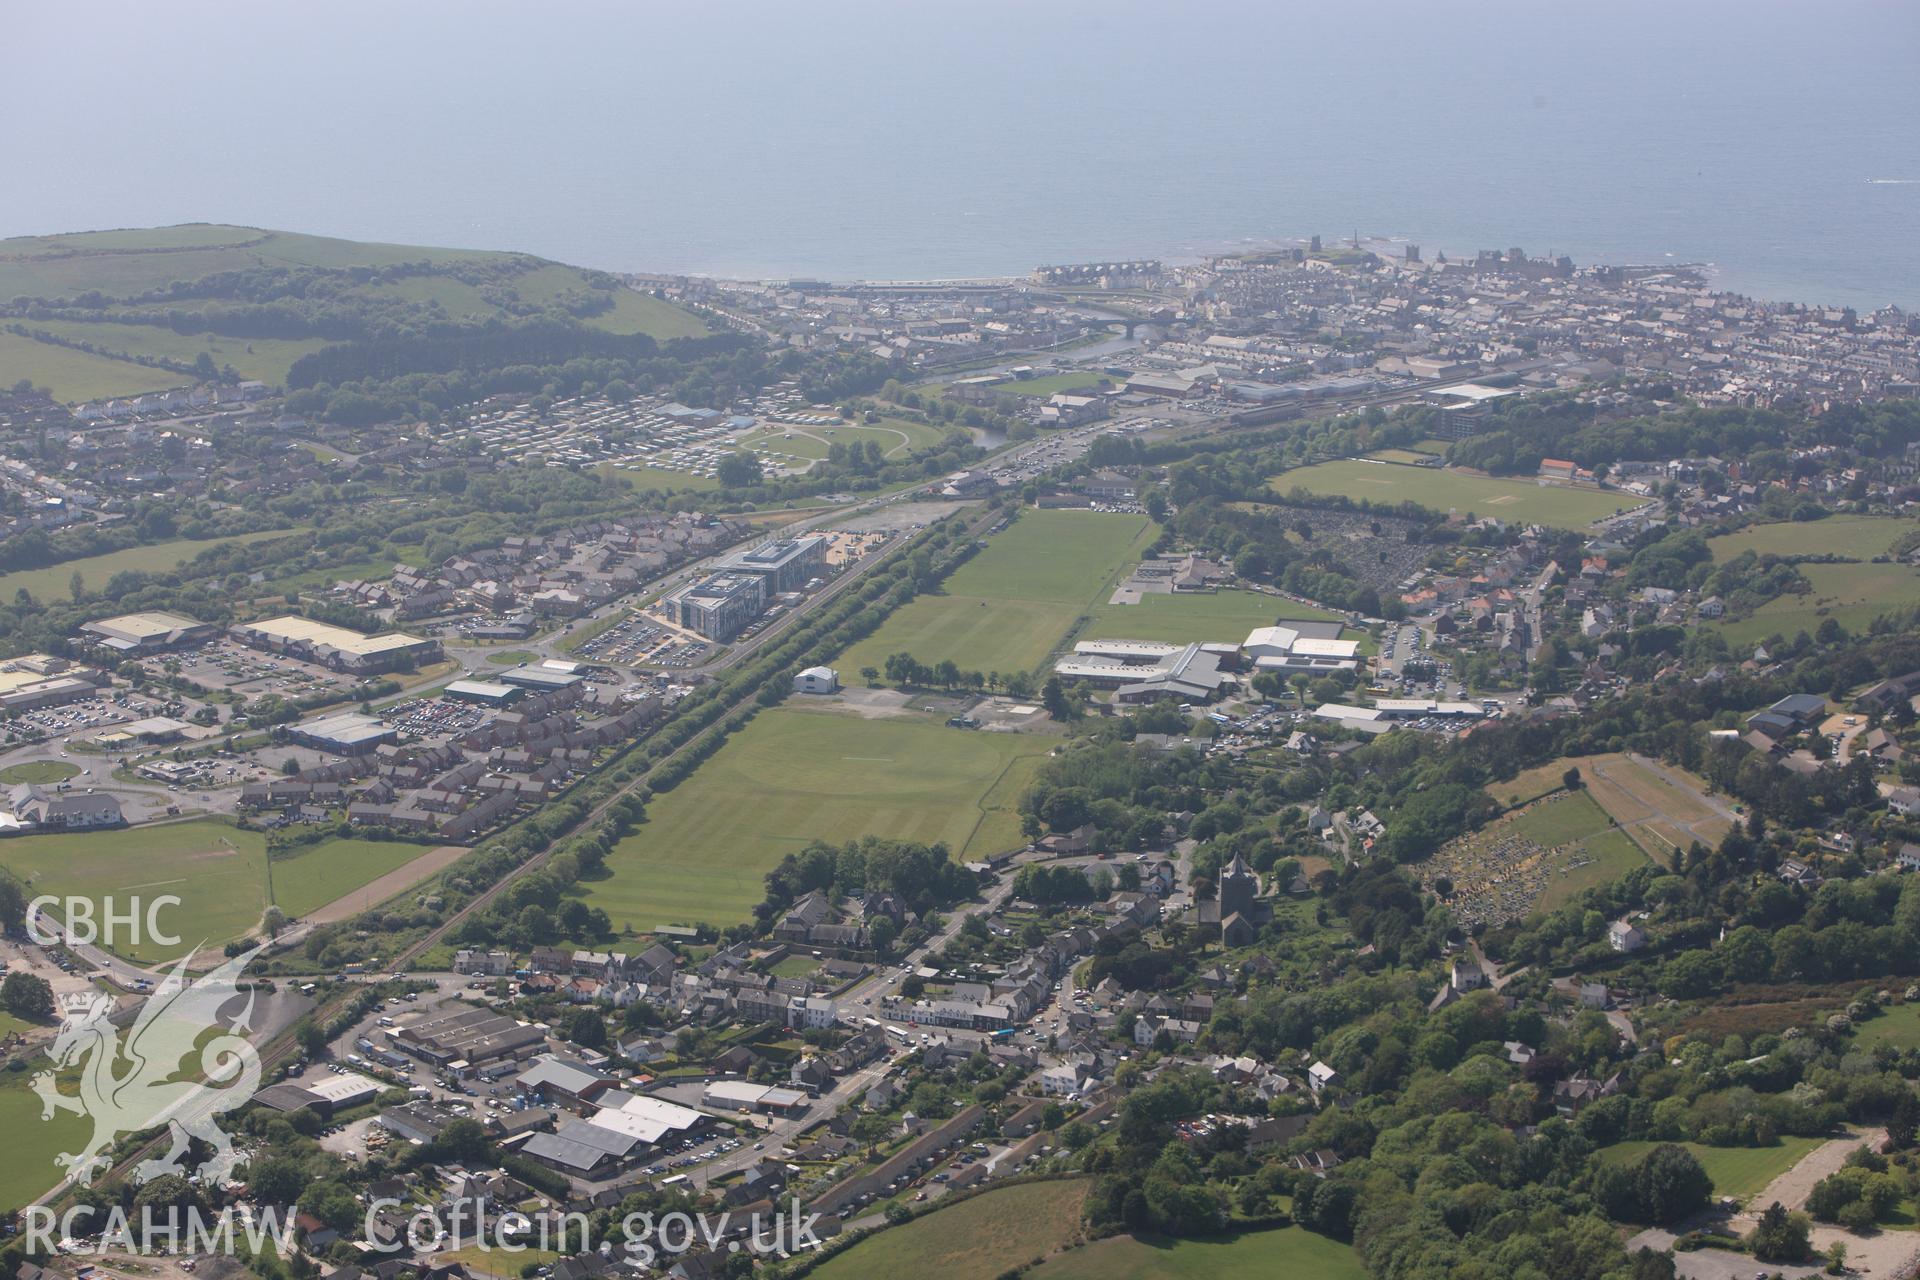 RCAHMW colour oblique photograph of Aberystwyth, general view from east. Taken by Toby Driver on 25/05/2010.